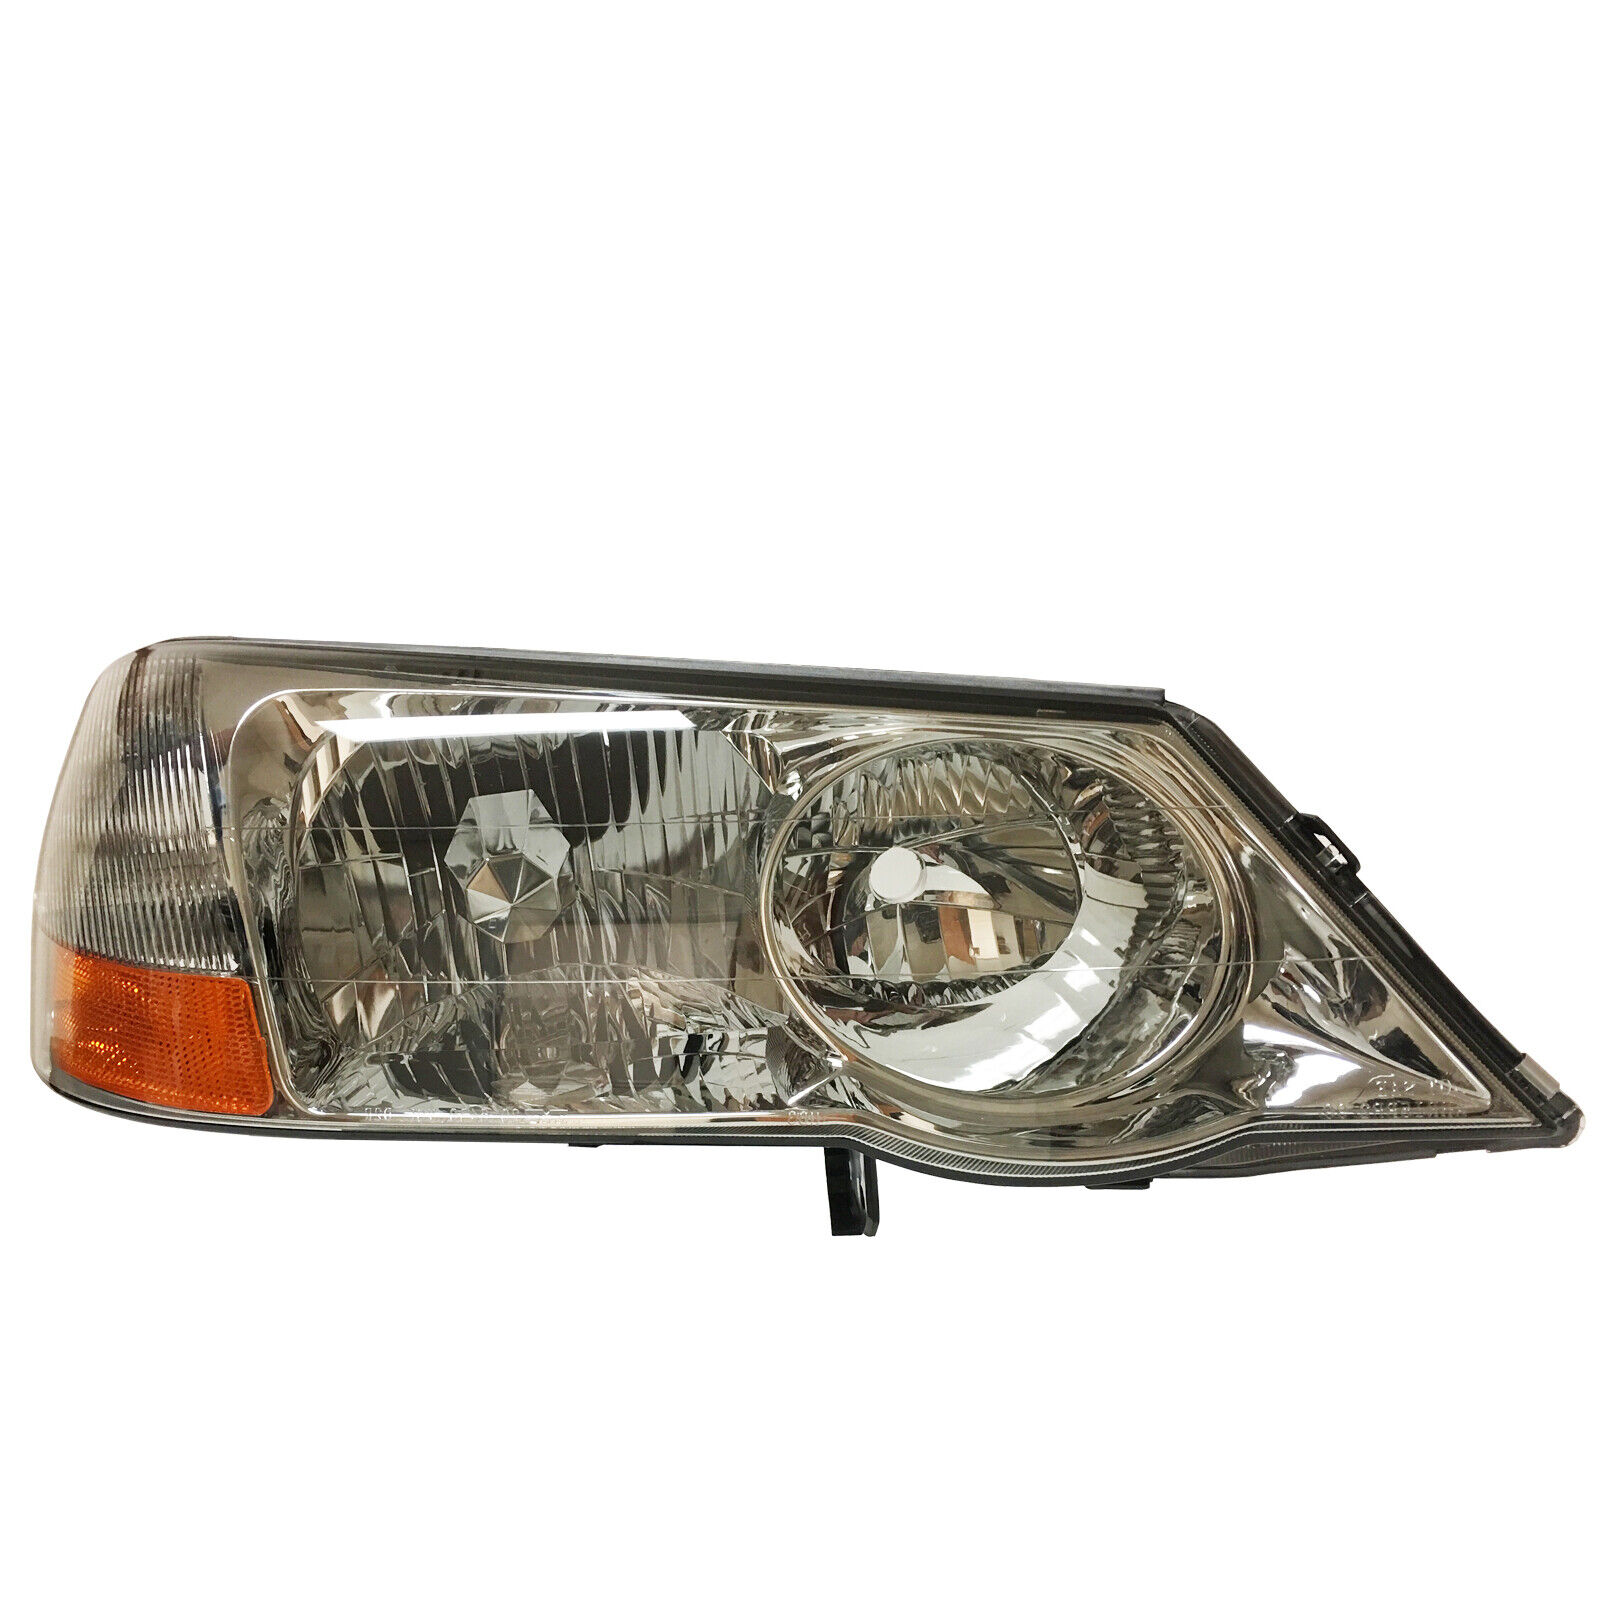 HID Headlight Right Passenger Side New Fits 02-03 Acura 3.2 Tl